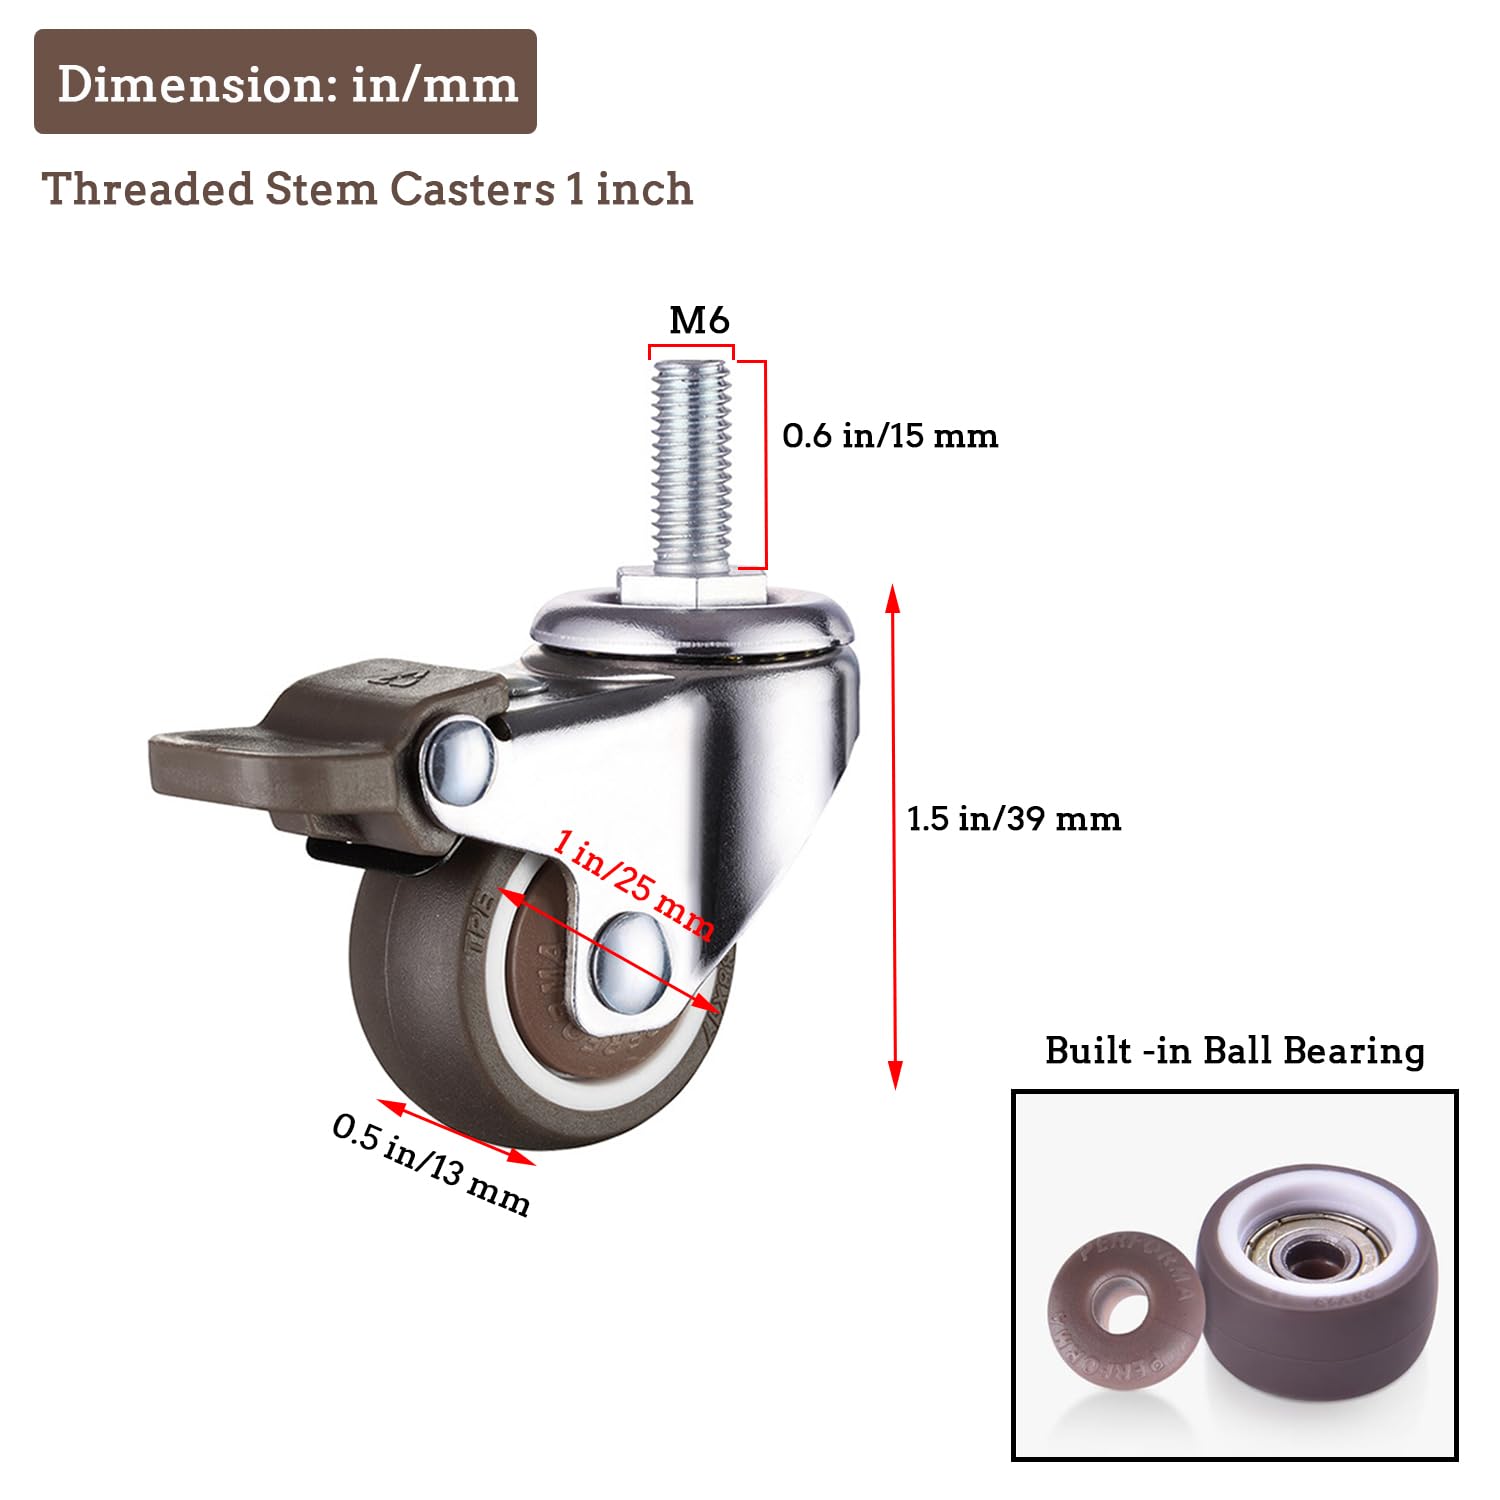 Mini Caster Wheels 1 inch Threaded Stem Casters with Brake and Screws Stem M6 x 15mm, Ball Bearing Silent TPE Rubber Low Profile Caster Wheels for Furniture Rolling Trolley Small Shopping Cart 4 Pack